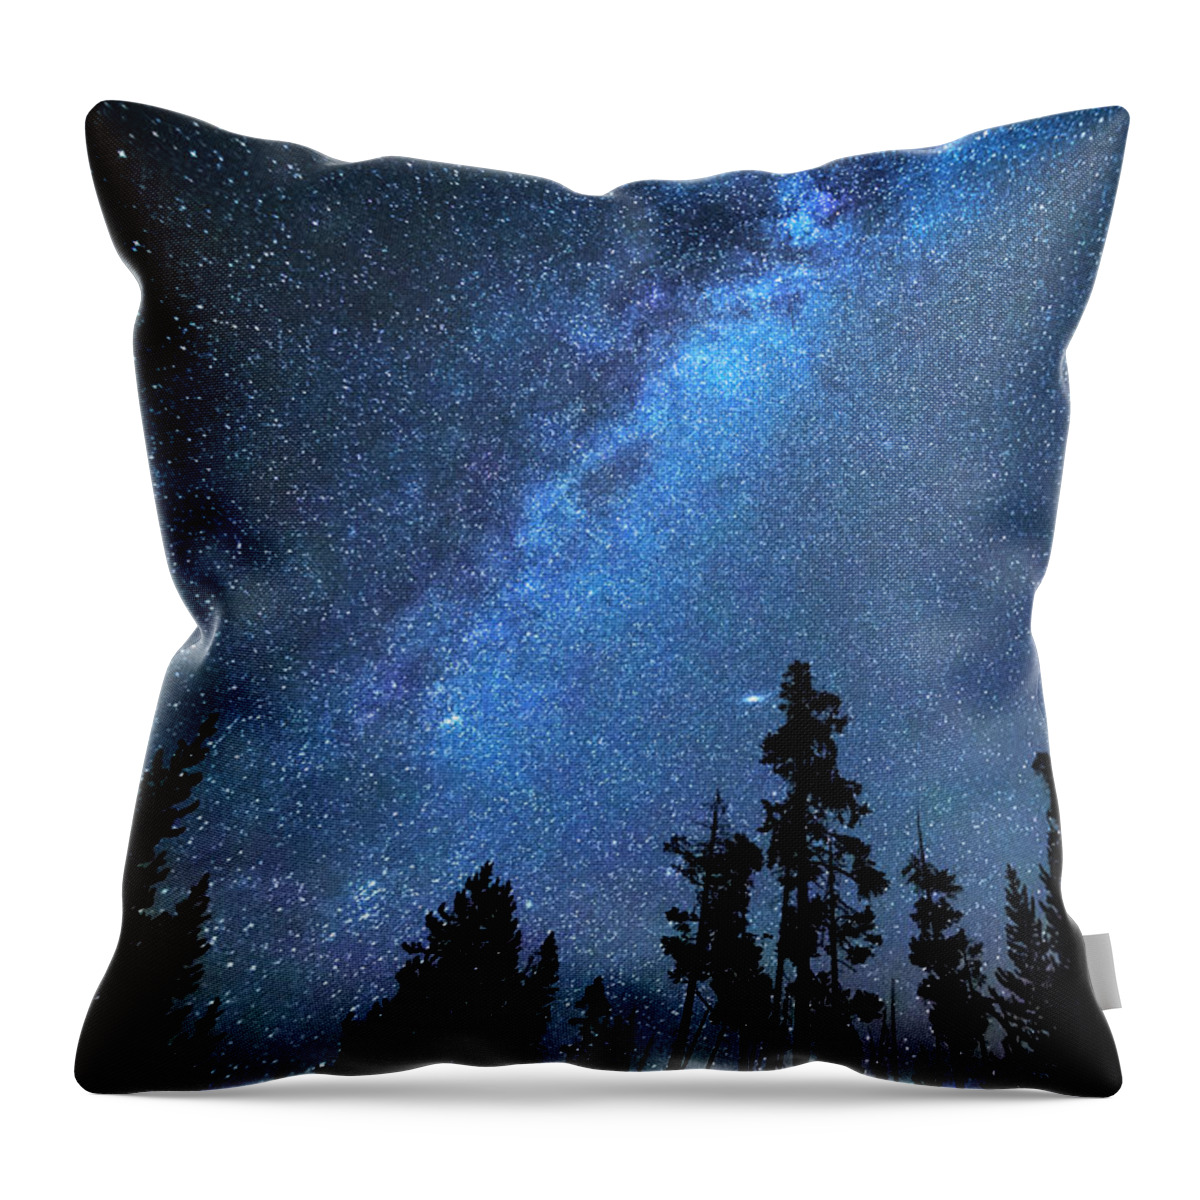 Milky Way Throw Pillow featuring the photograph Blue Starry Night by James BO Insogna